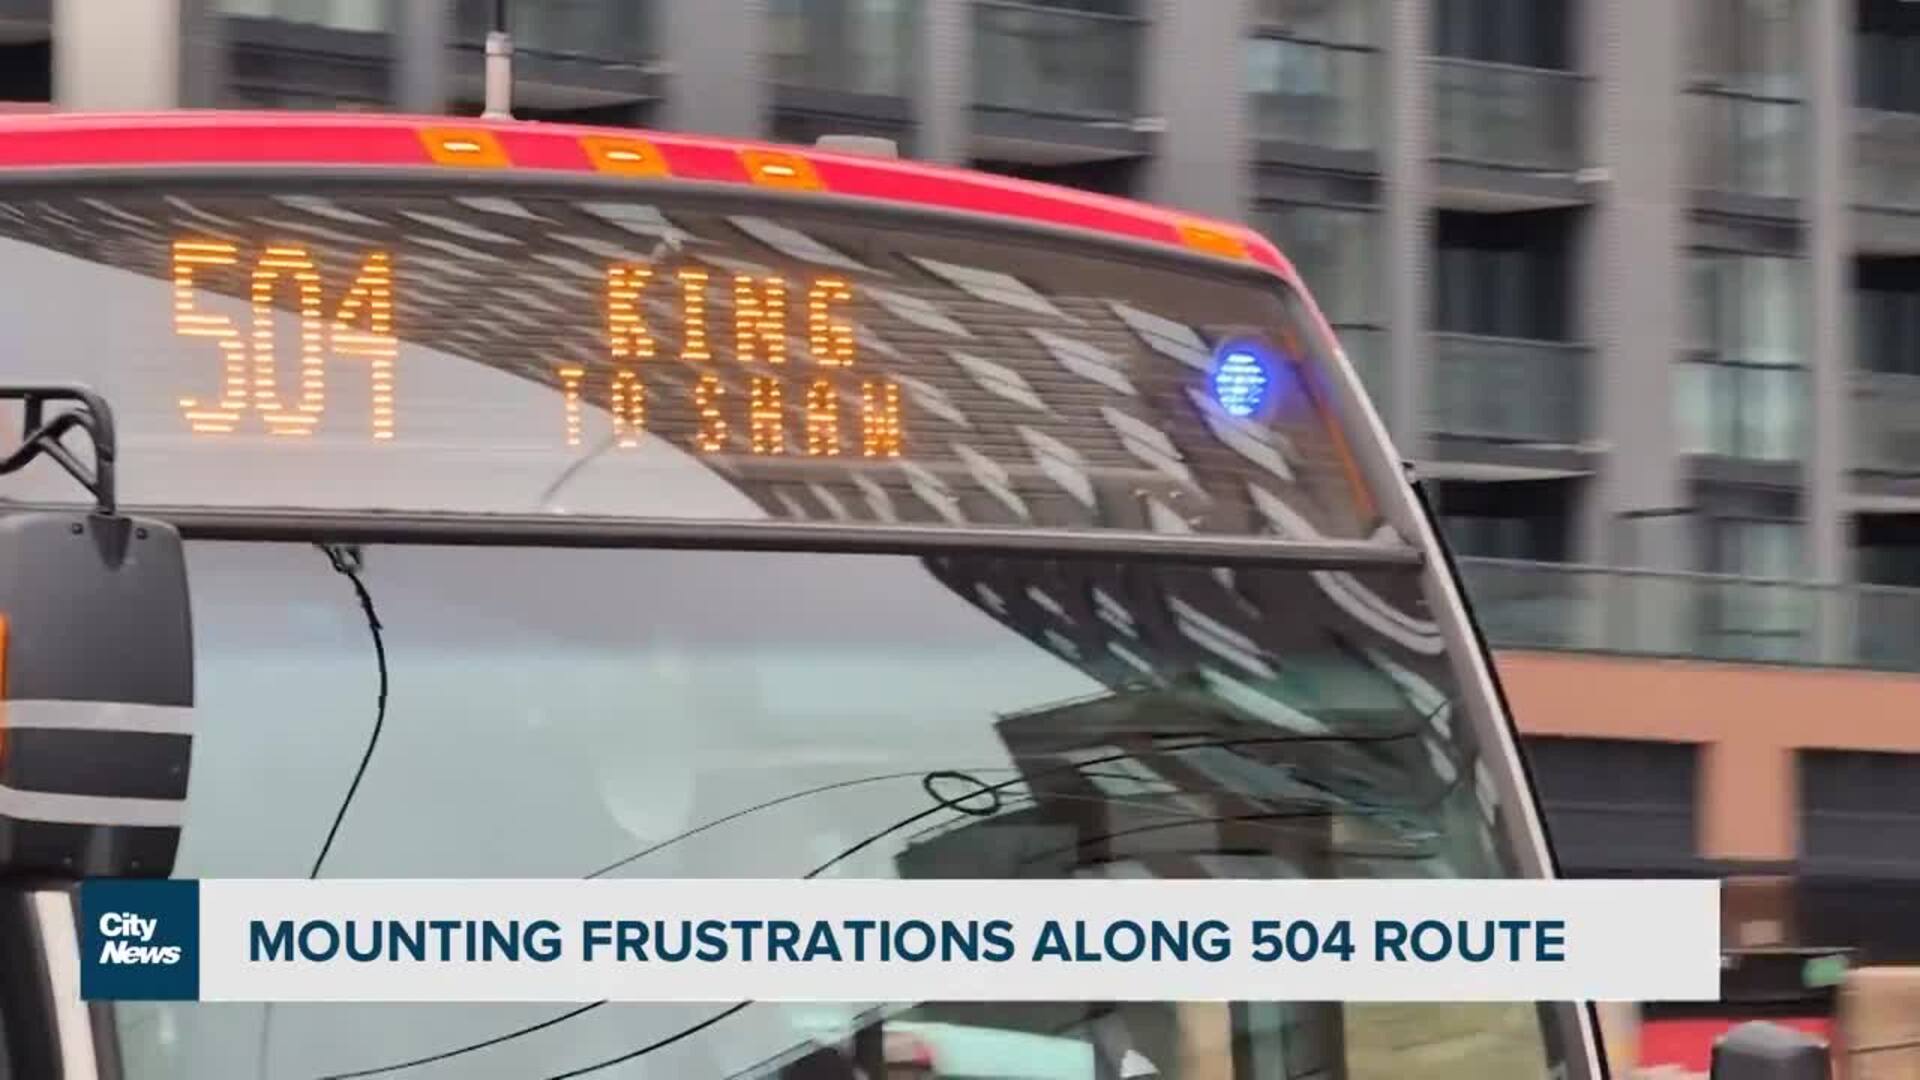 Mounting frustration with TTC's 504 route